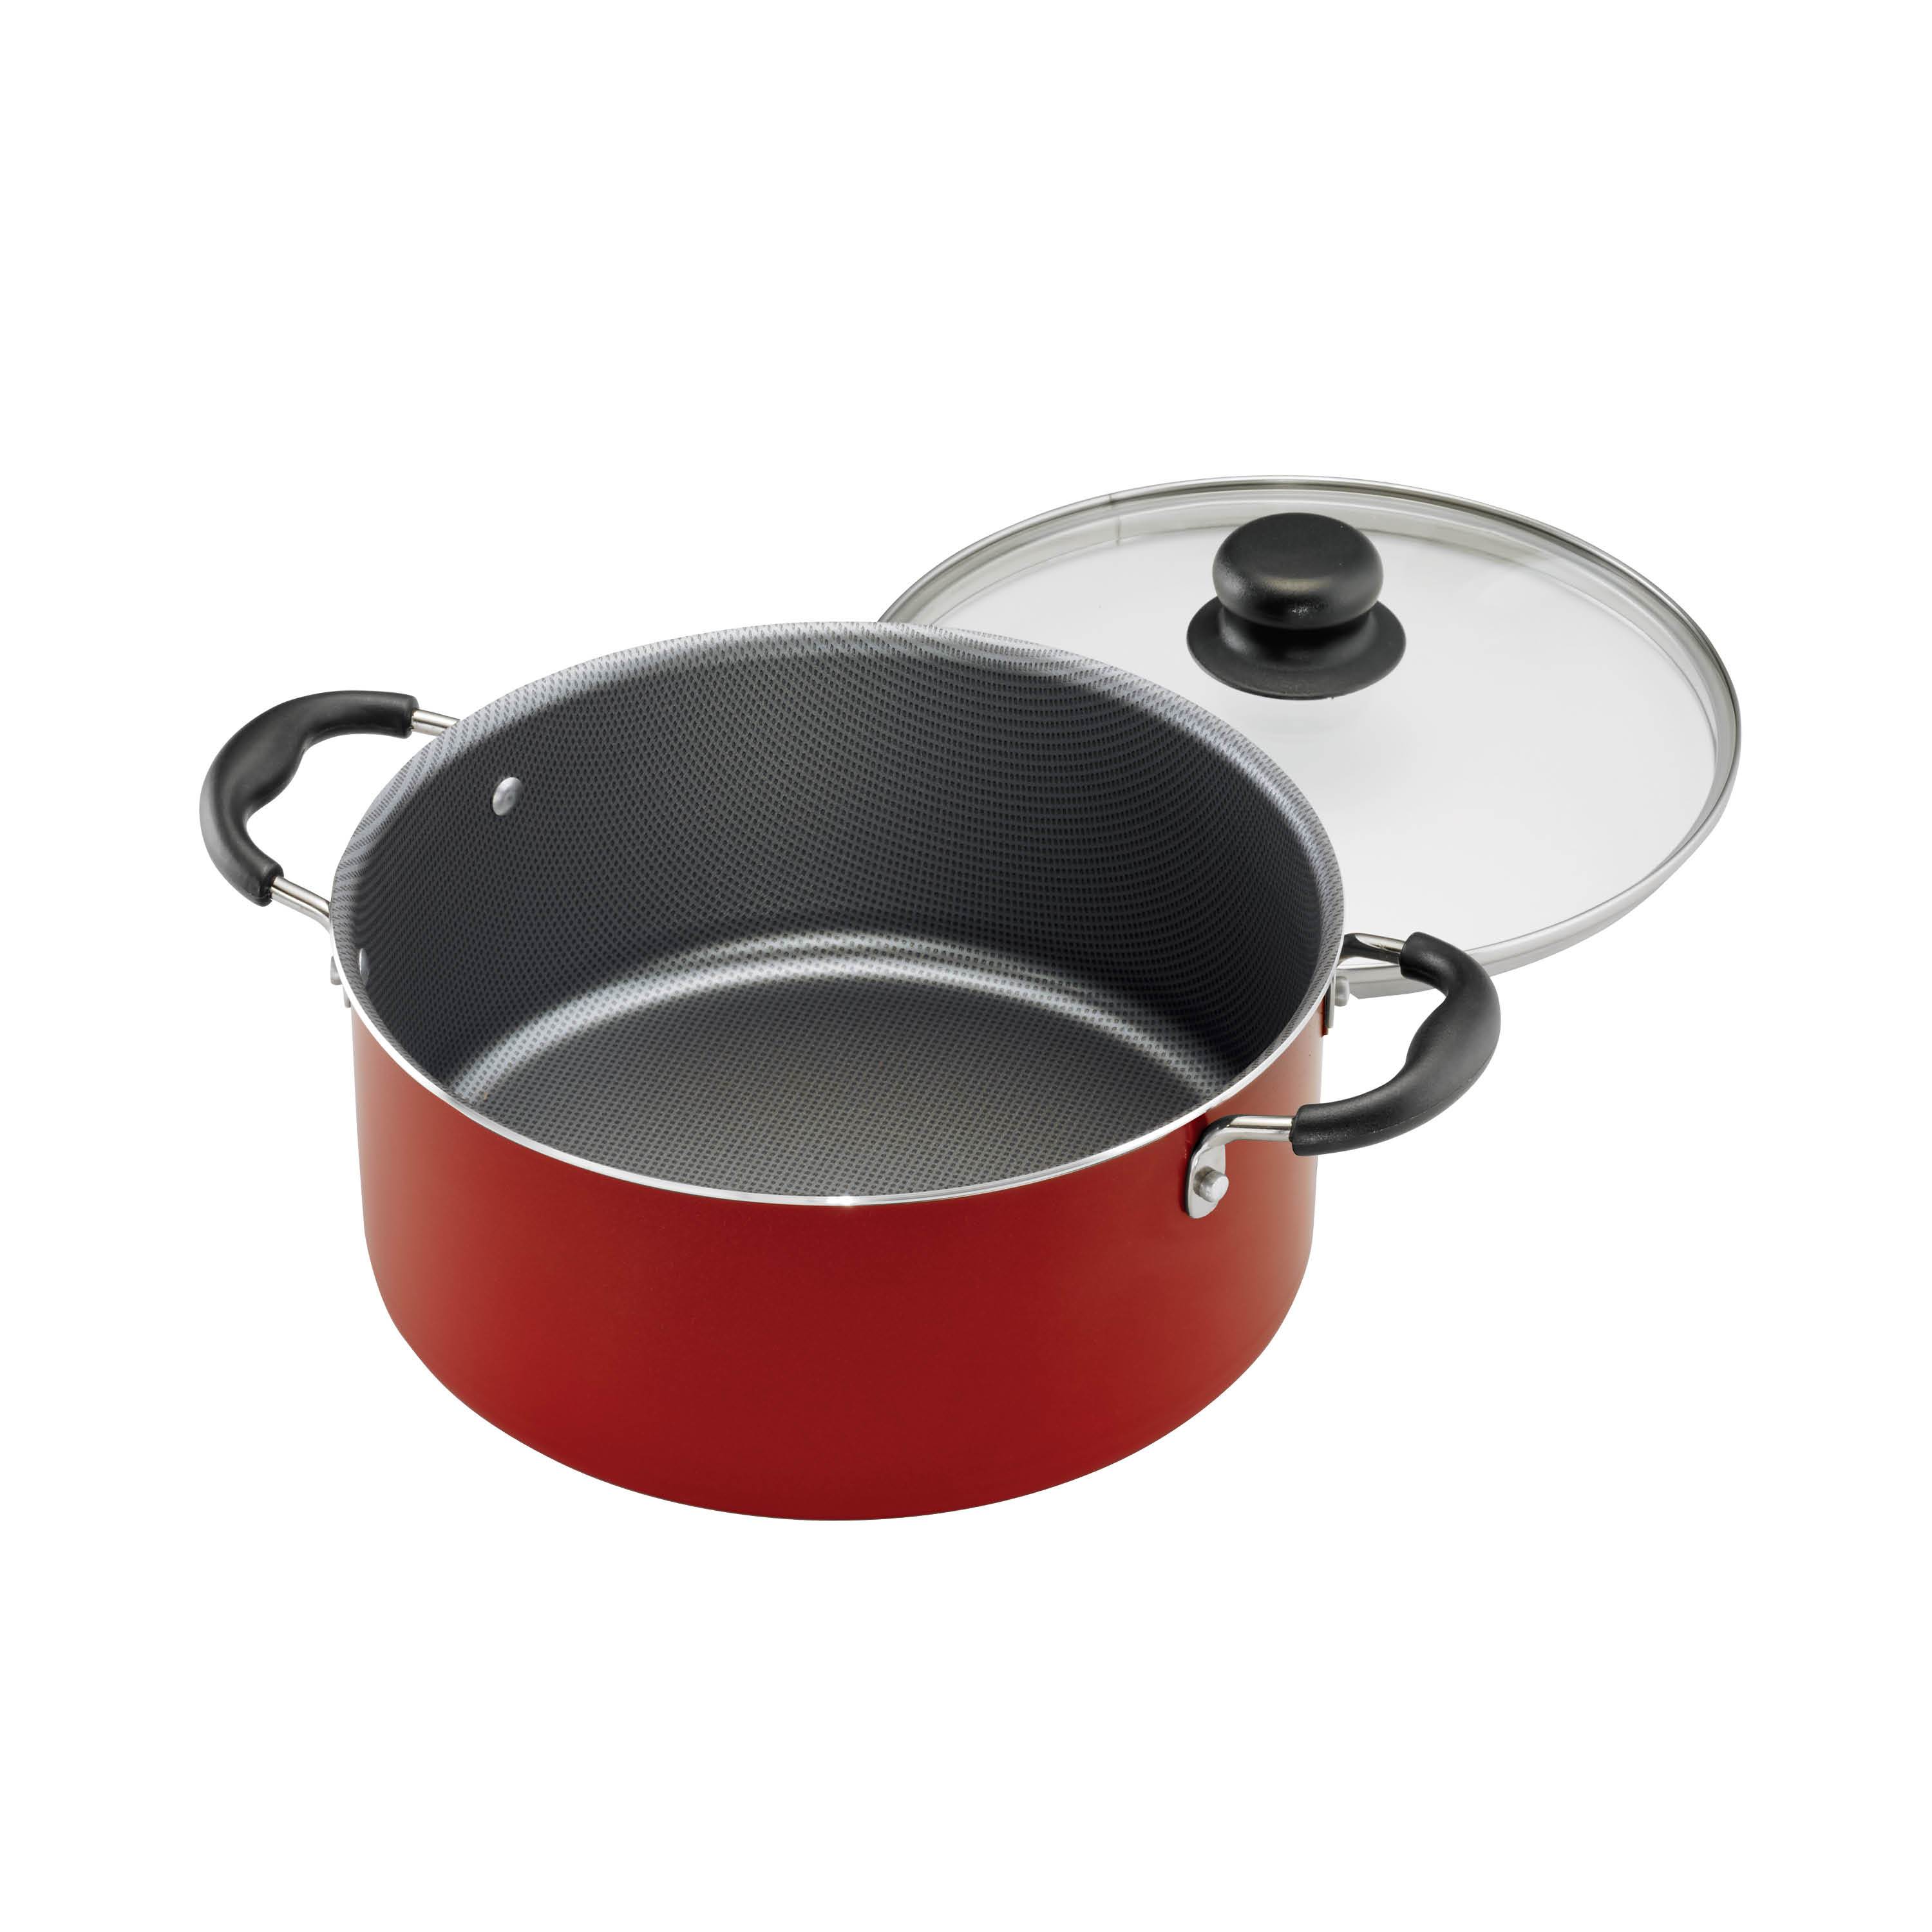 Tramontina Primaware 18 Piece Non-stick Cookware Set, Red - image 24 of 26